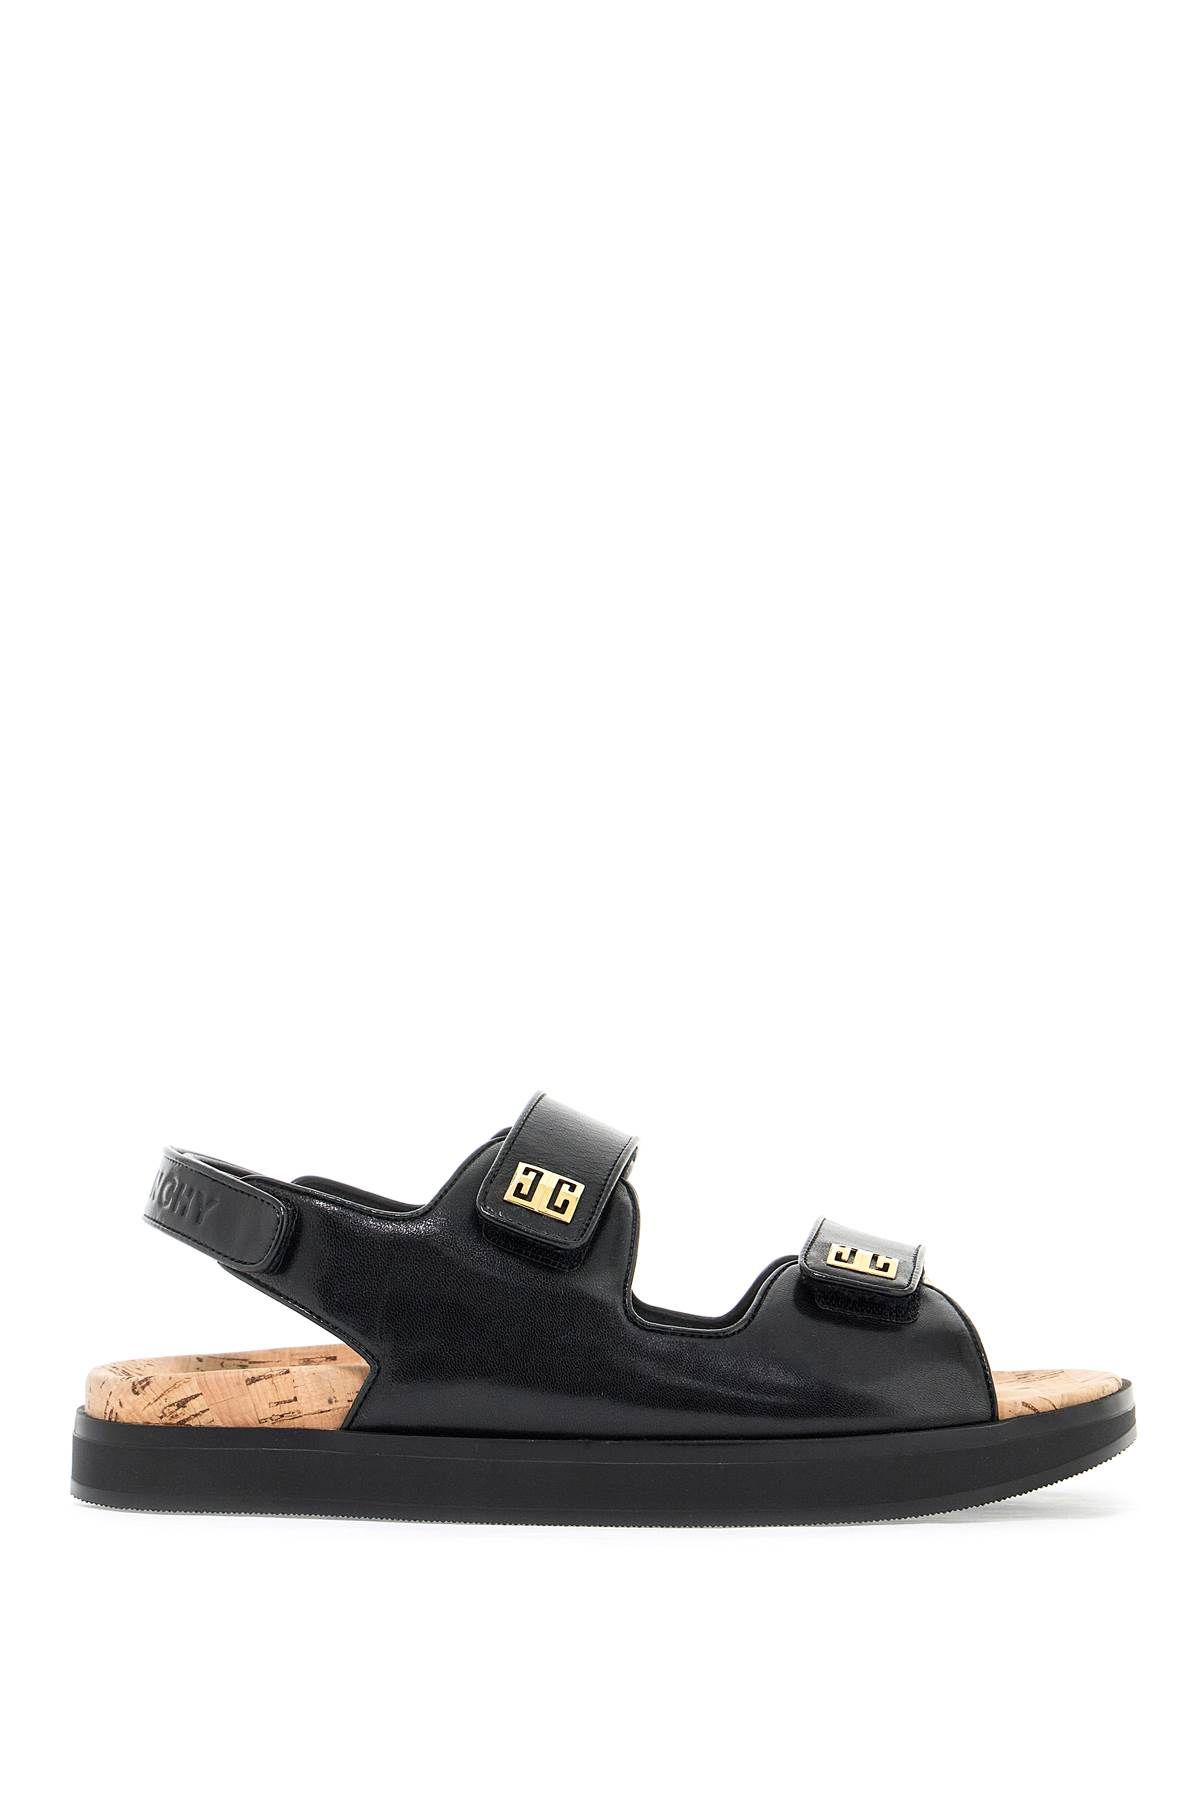 Givenchy GIVENCHY leather 4g sandals